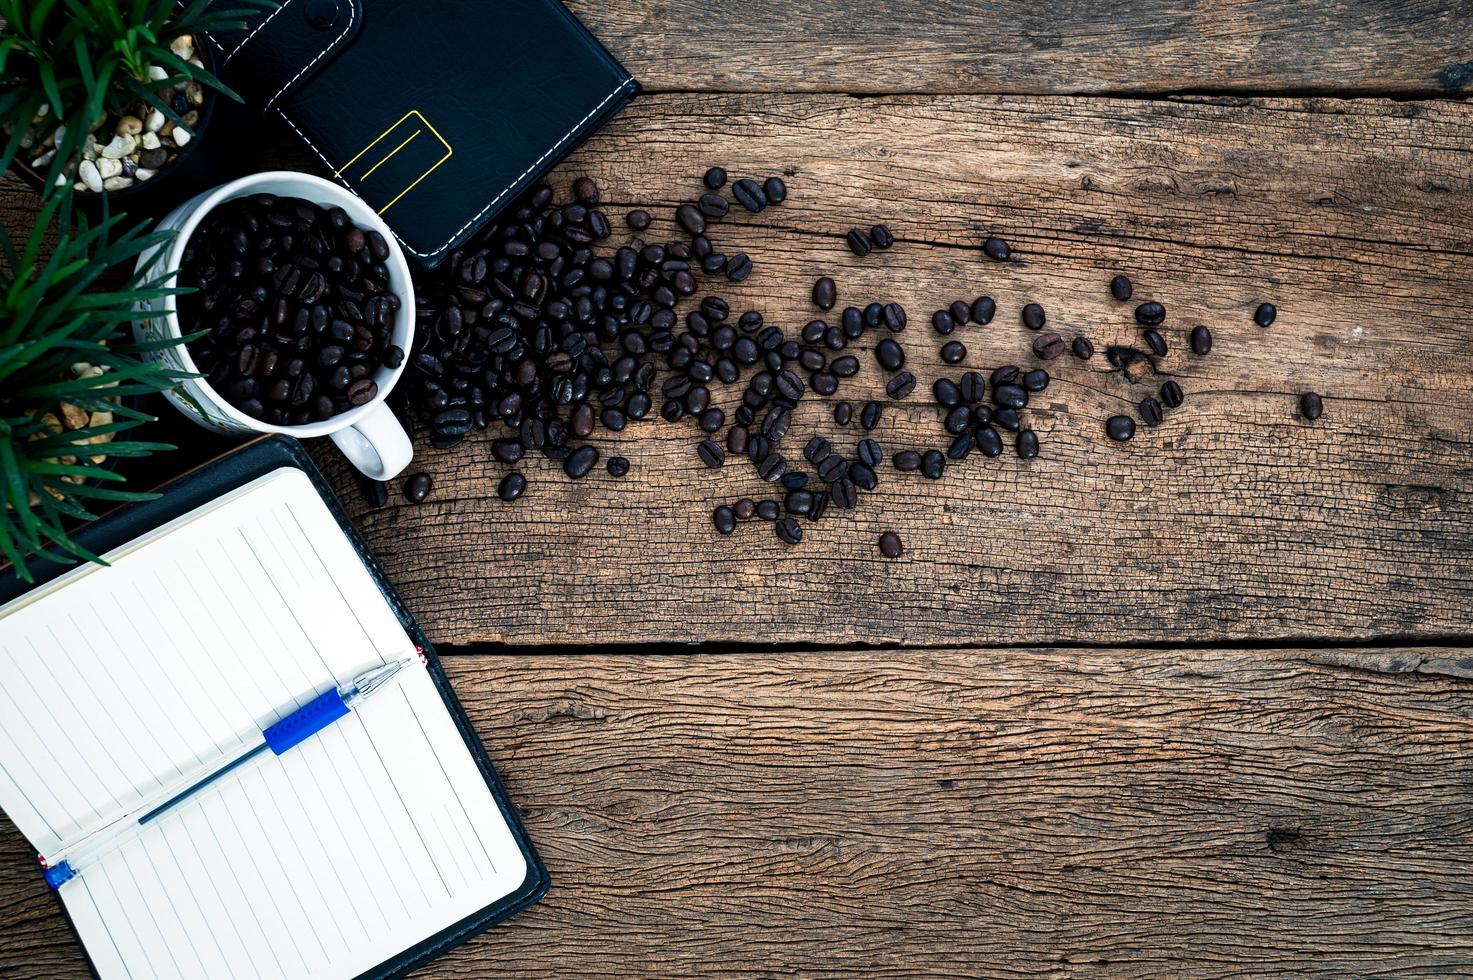 Notebooks, pen and coffee beans on the desk photo